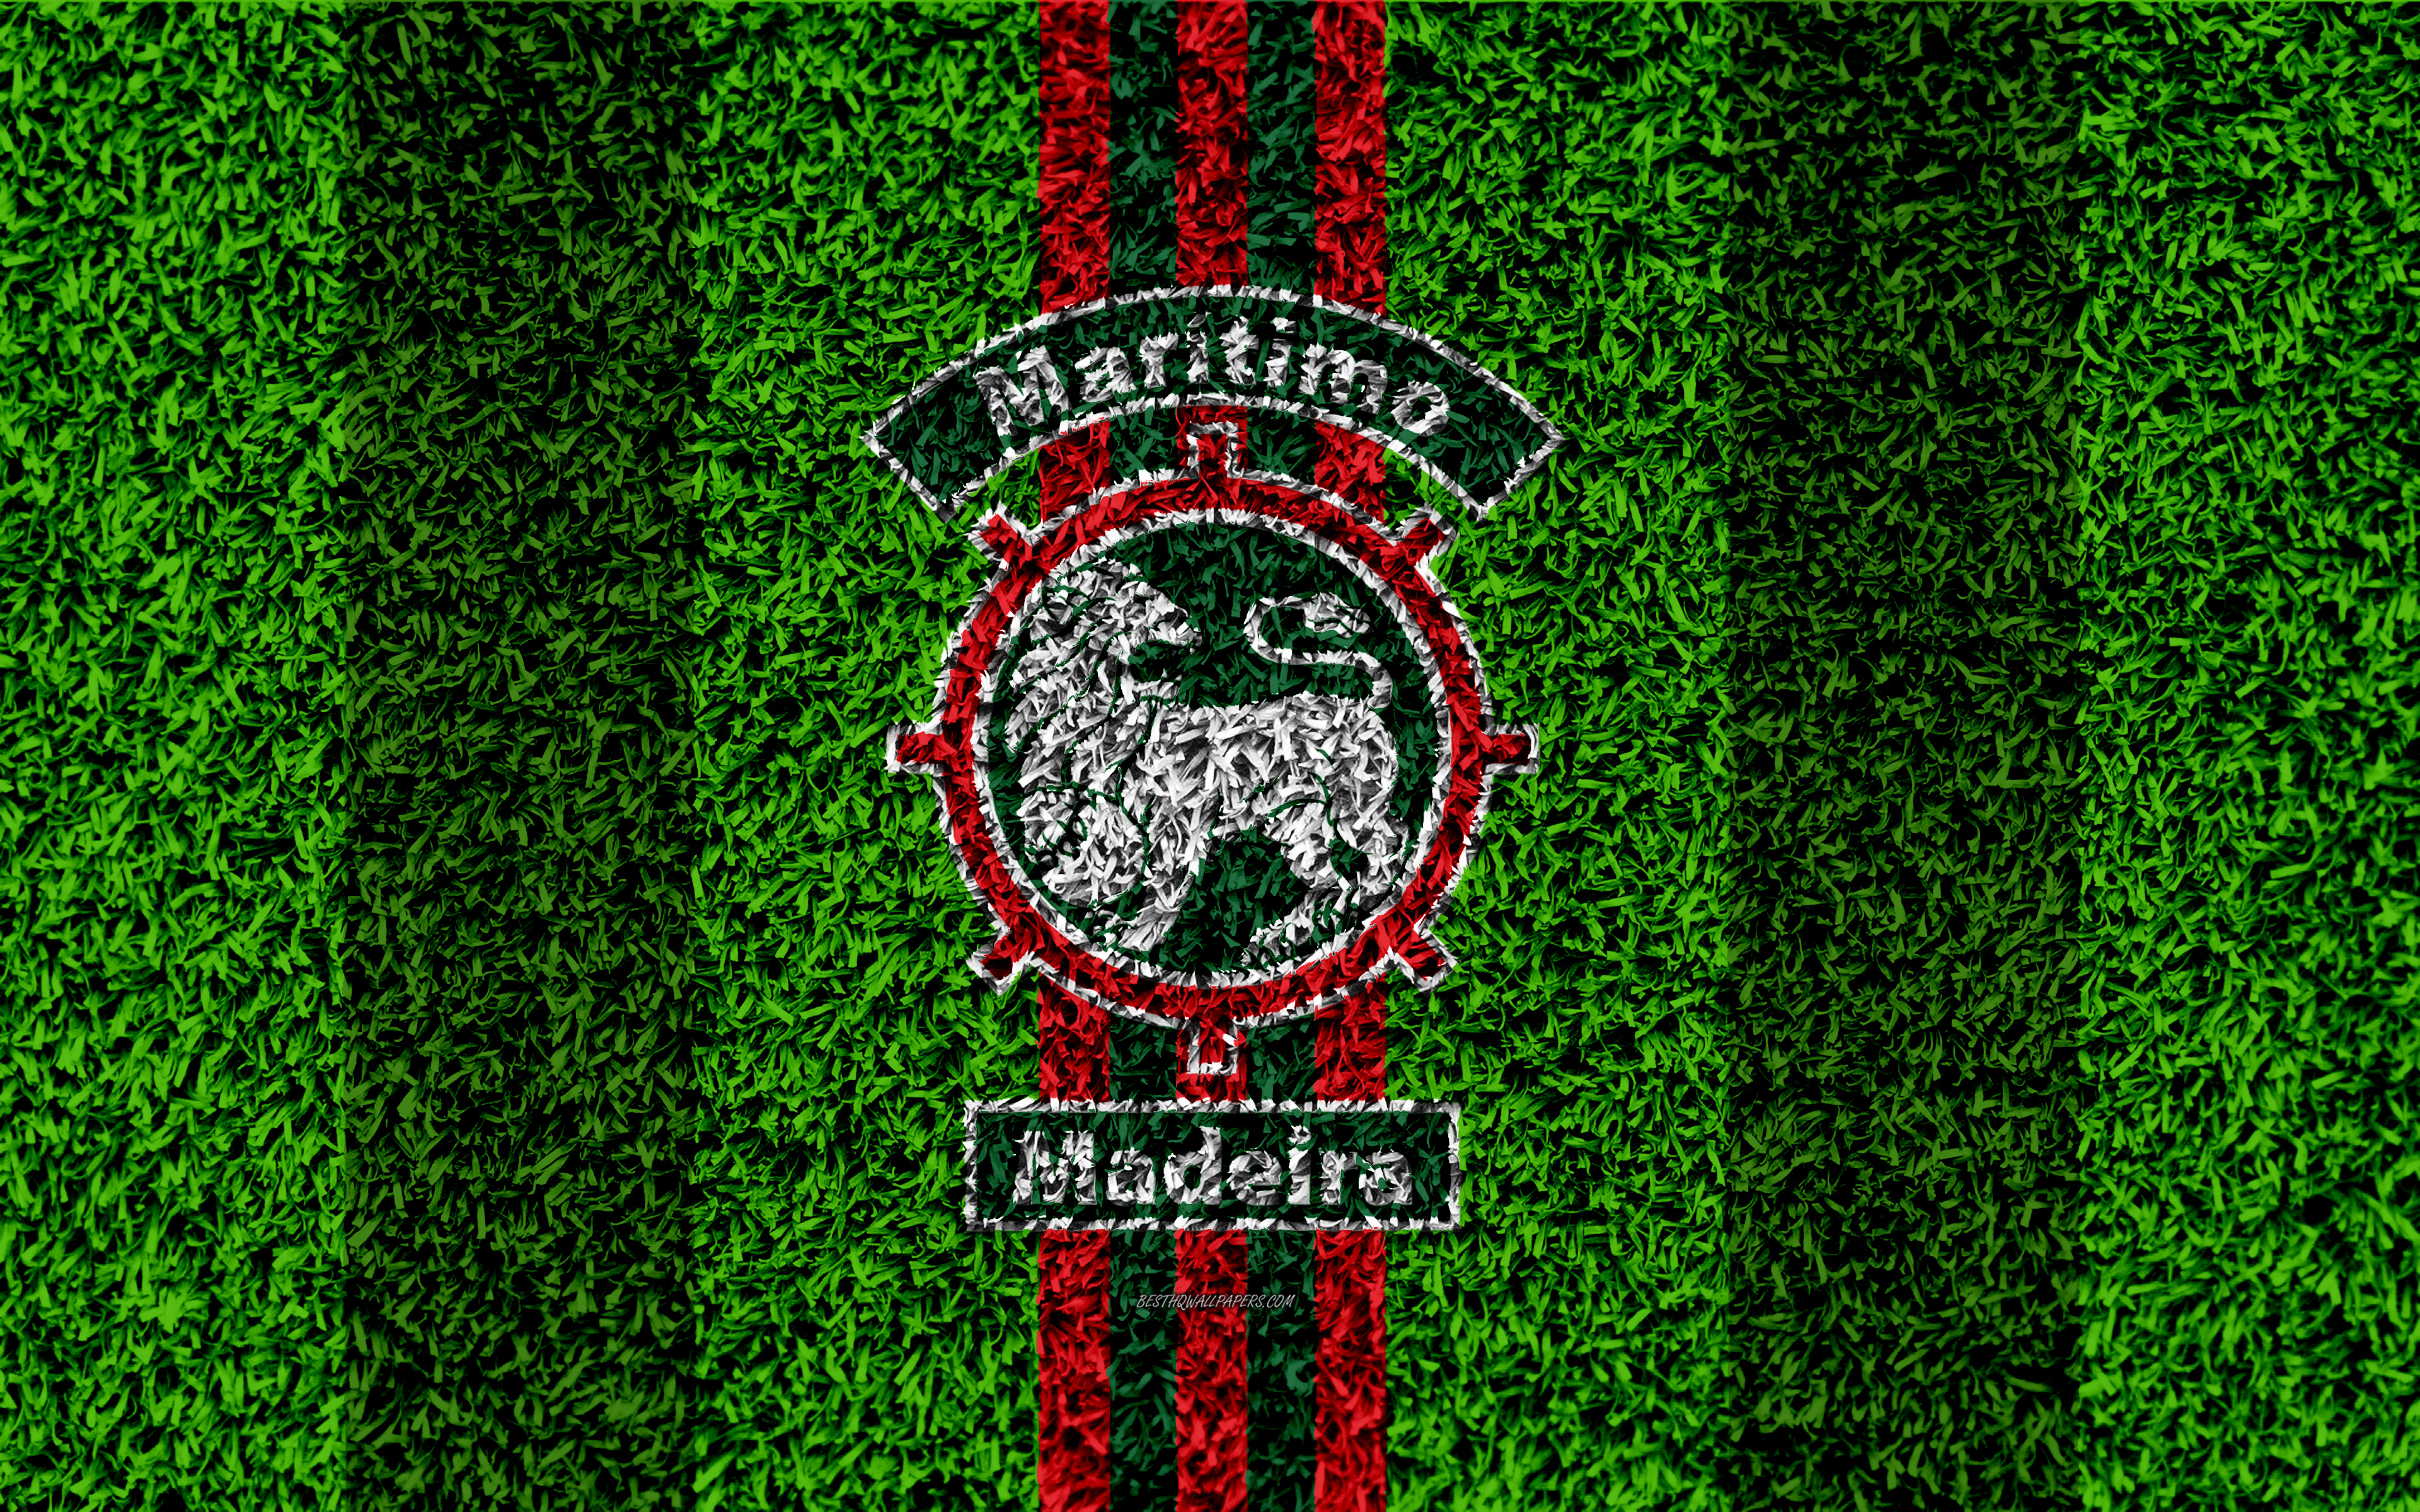 Download wallpaper Marítimo FC, 4k, logo, football lawn, Portuguese football club, red green lines, Primeira Liga, Funchal, Portugal, football, Club Sport Marítimo for desktop with resolution 3840x2400. High Quality HD picture wallpaper